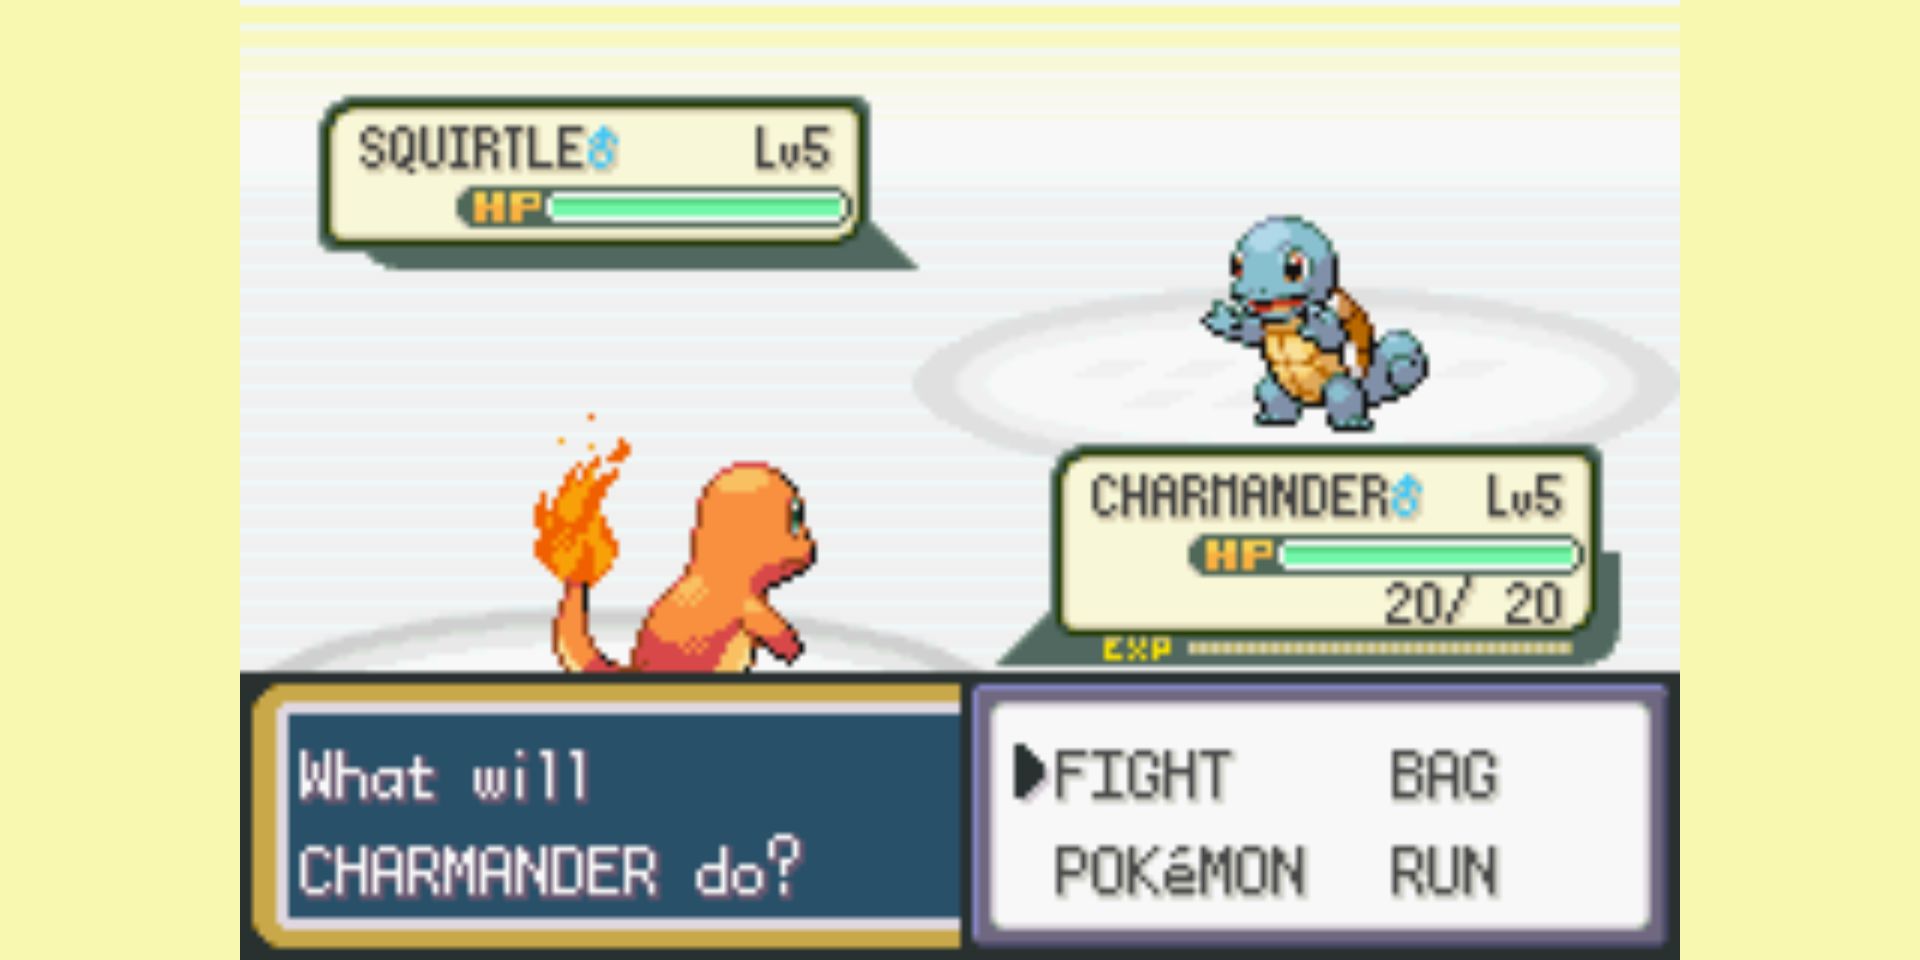 Pokemon FireRed LeafGreen battle screen showing Charmander fighting Squirtle.